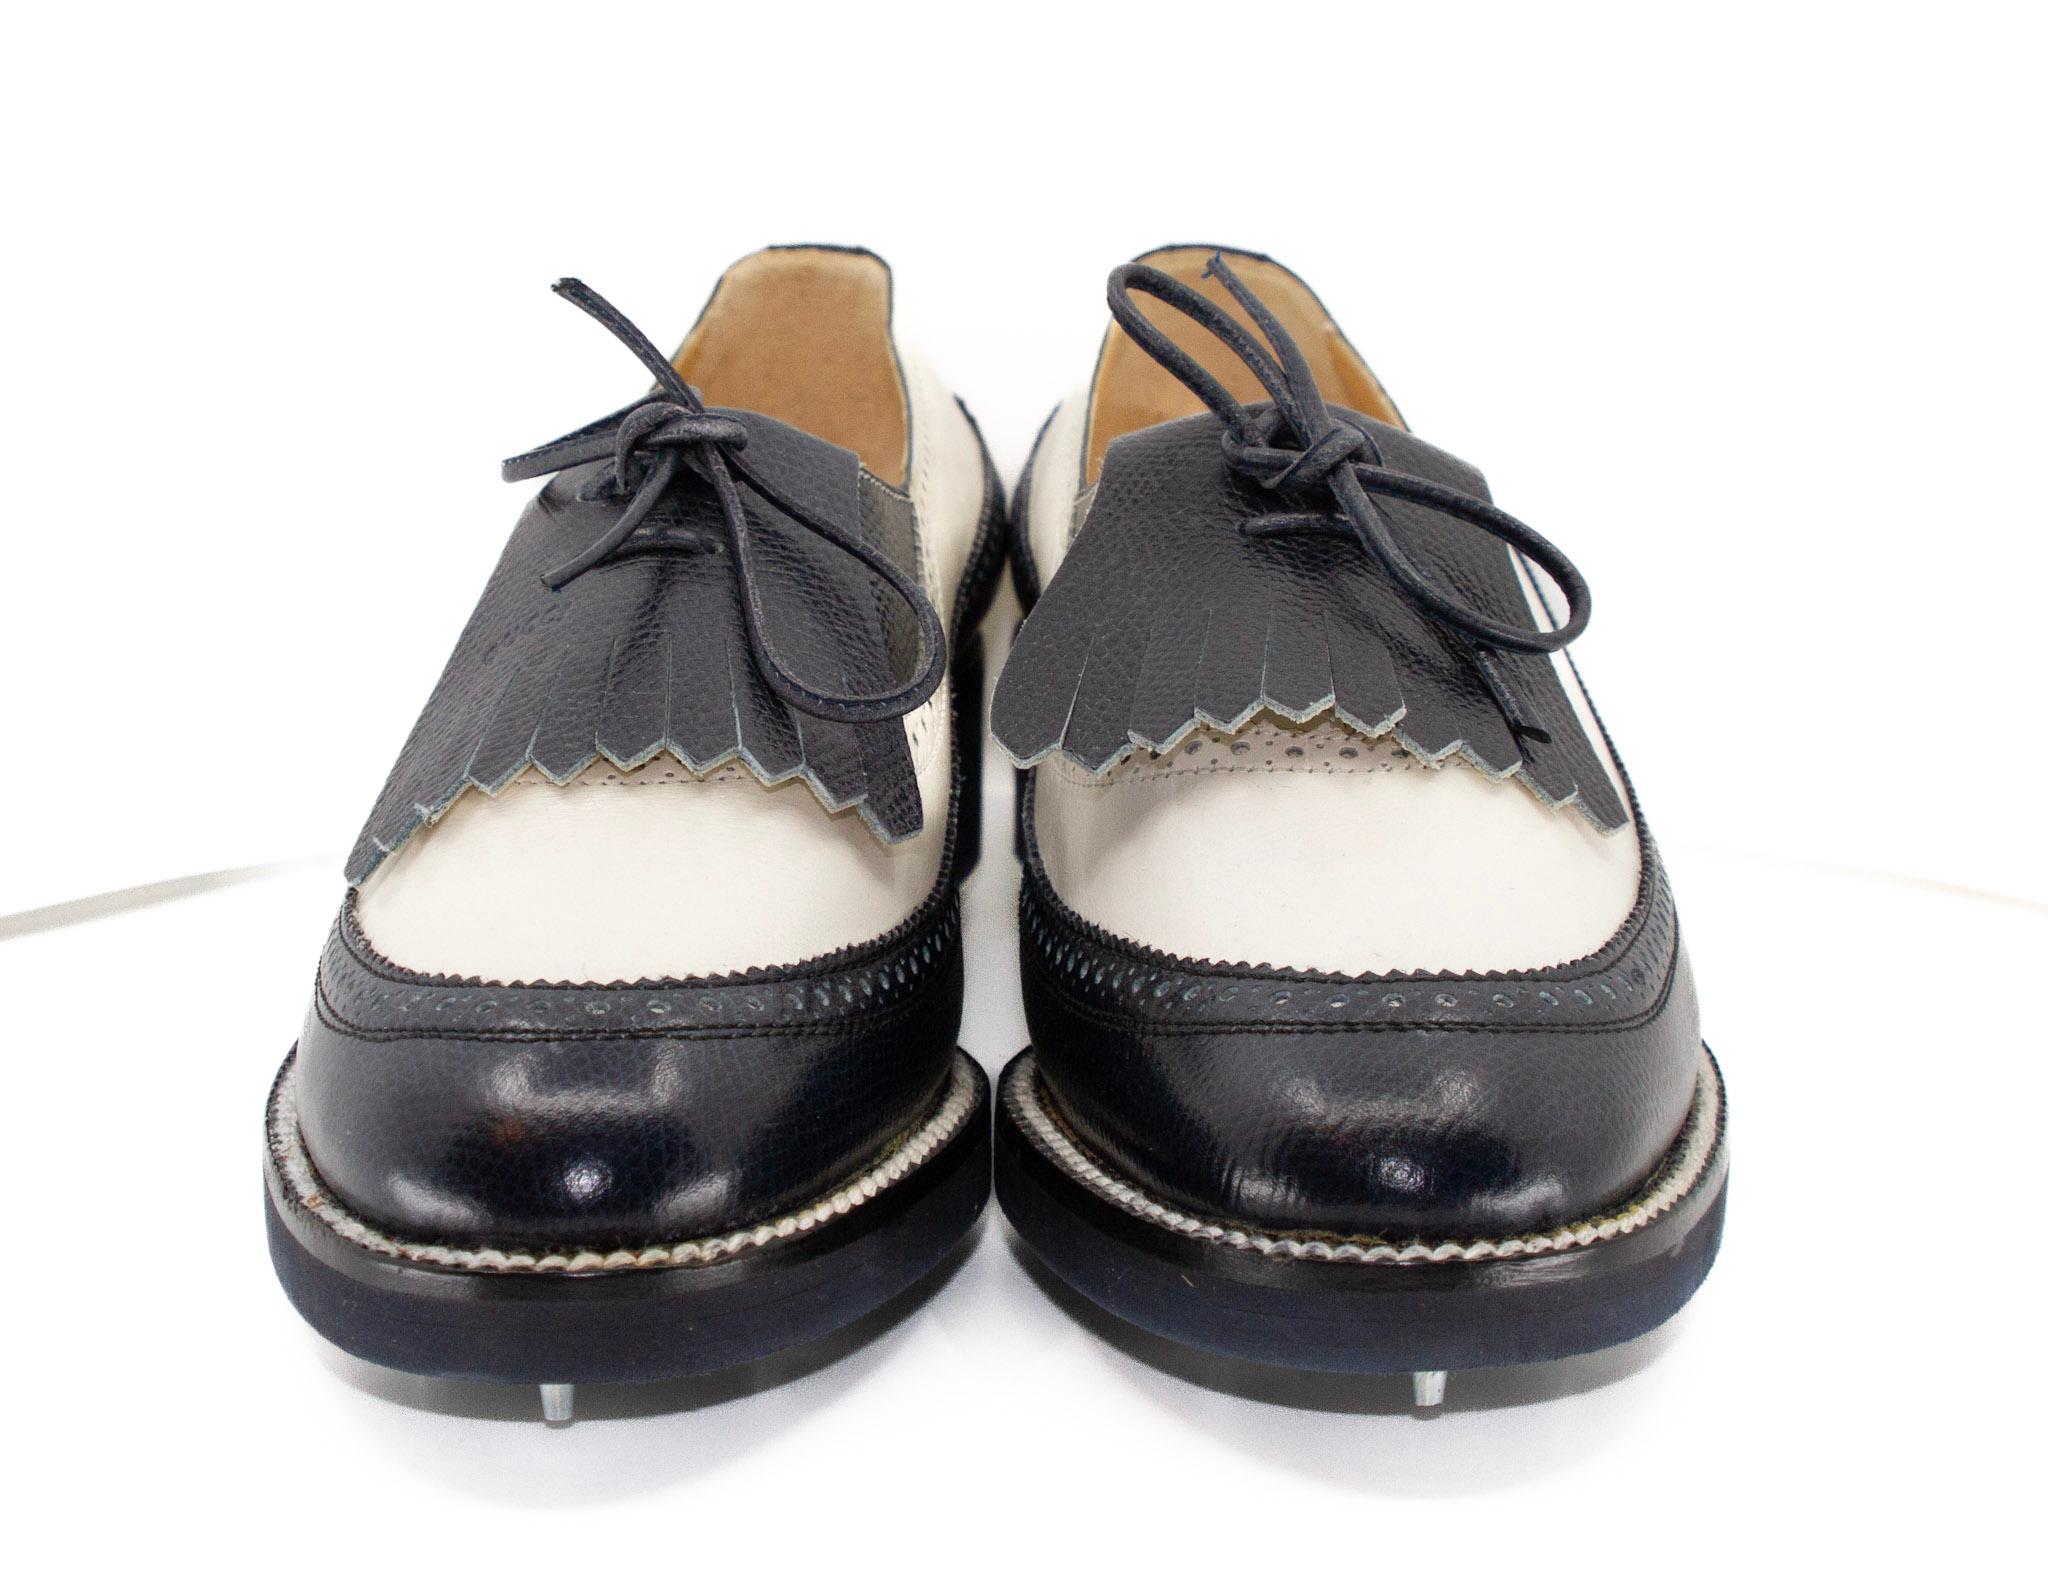 Gucci Vintage Black & White Leather Golf Shoes or Cleats  For Sale 3